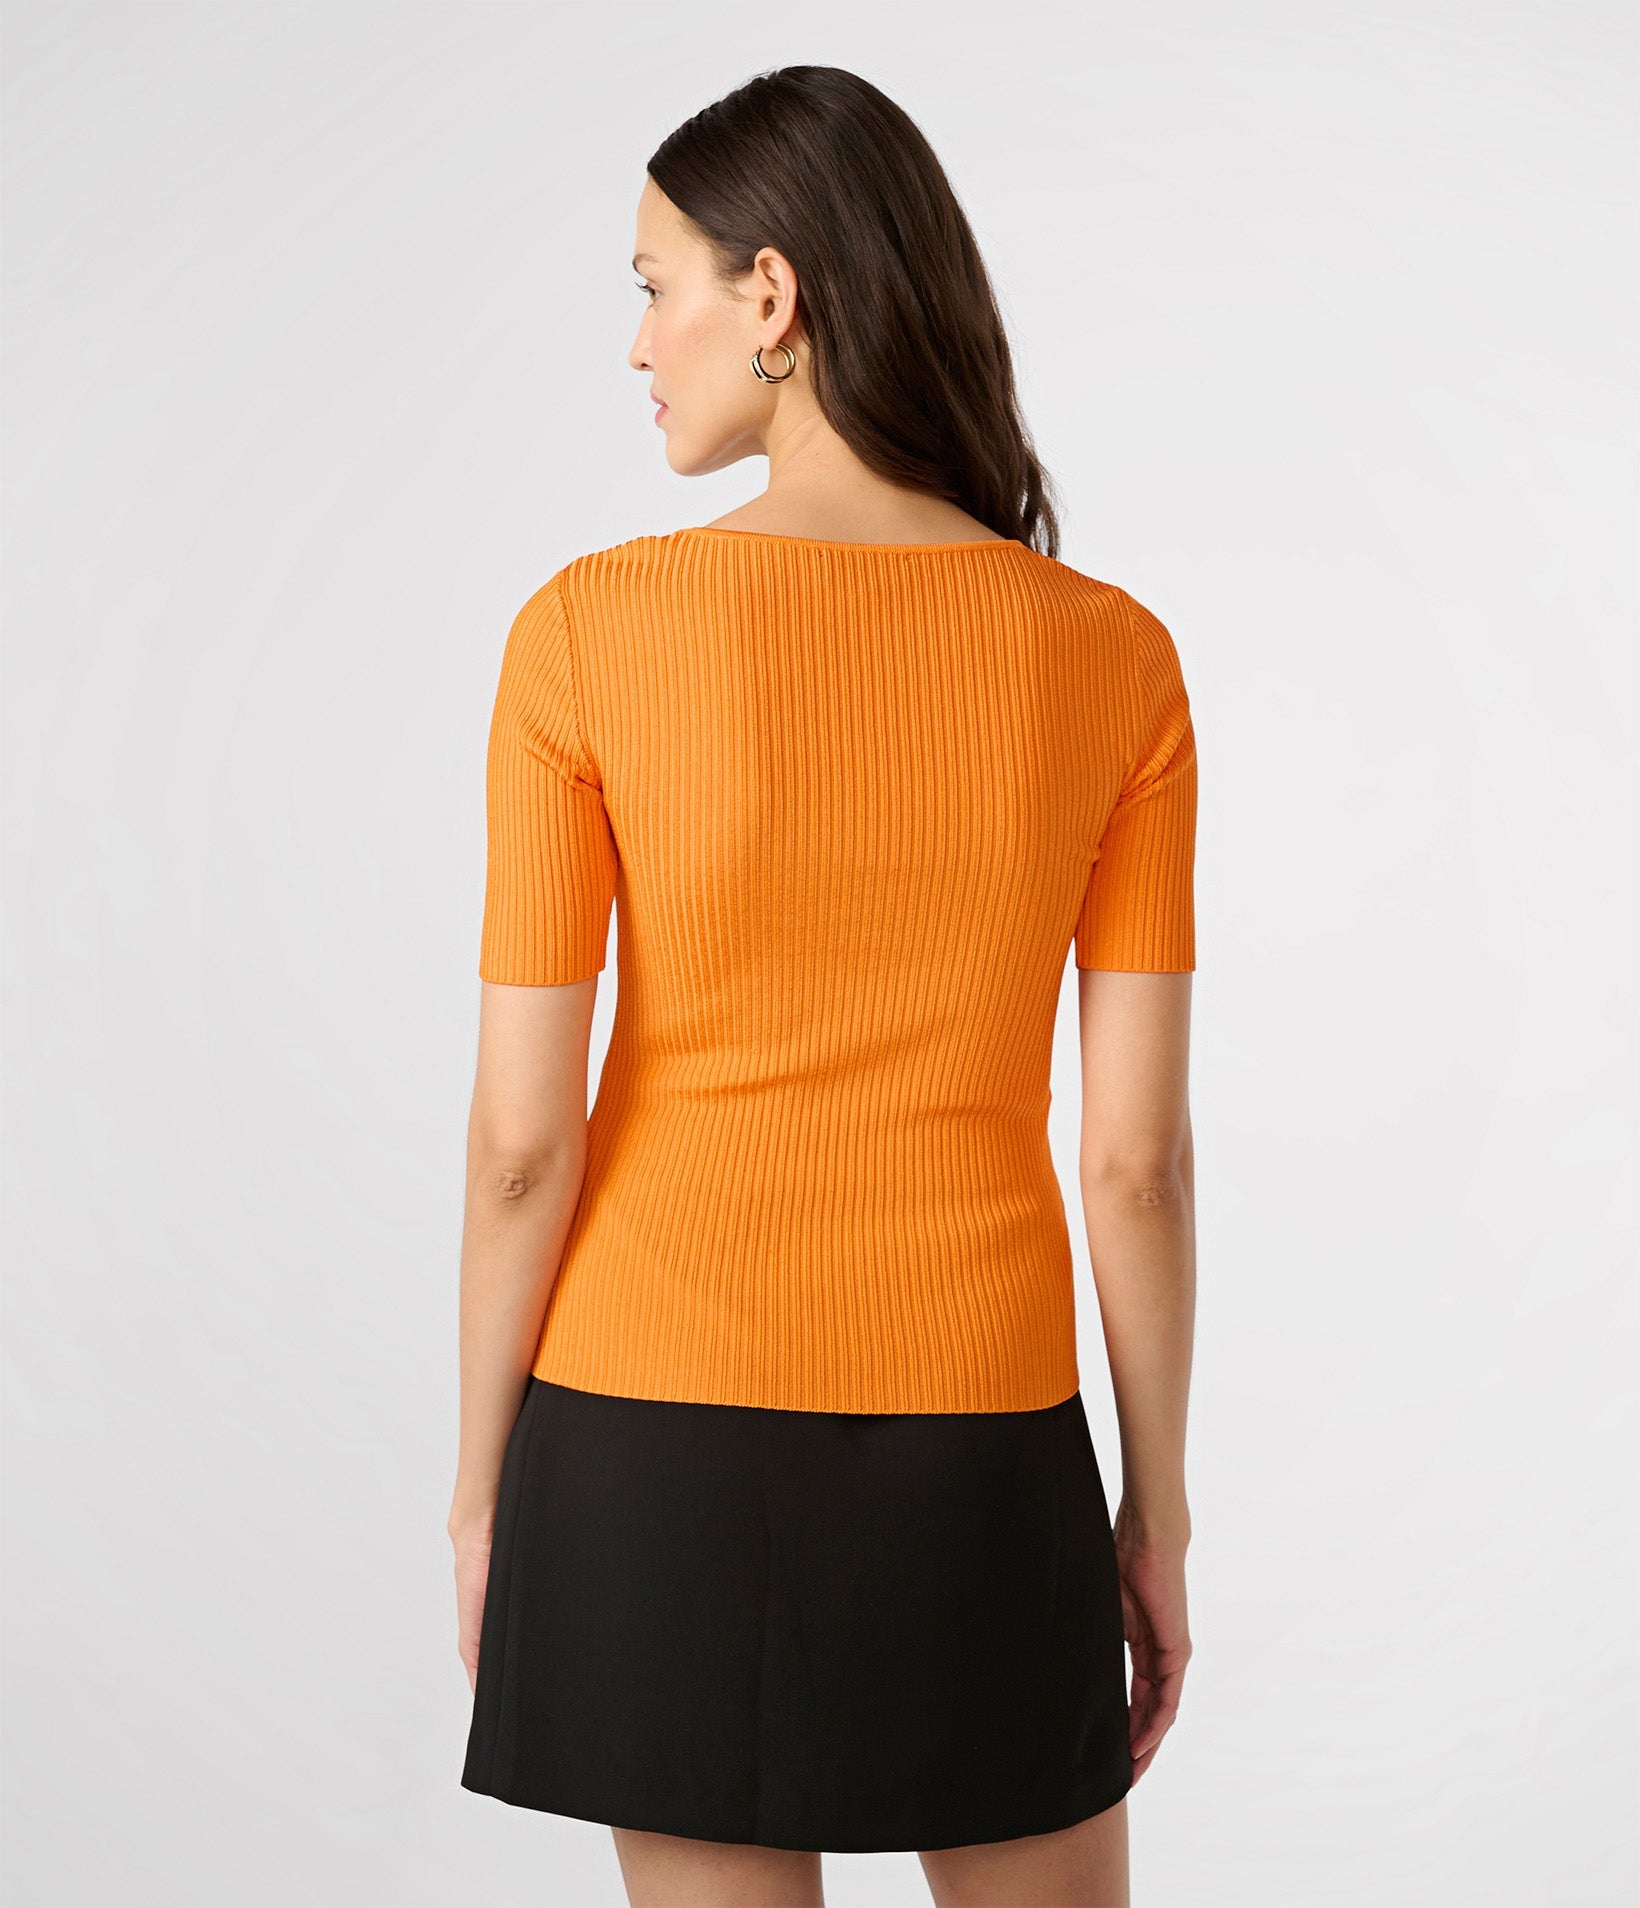 BUTTON DETAIL SQUARE NECK SWEATER